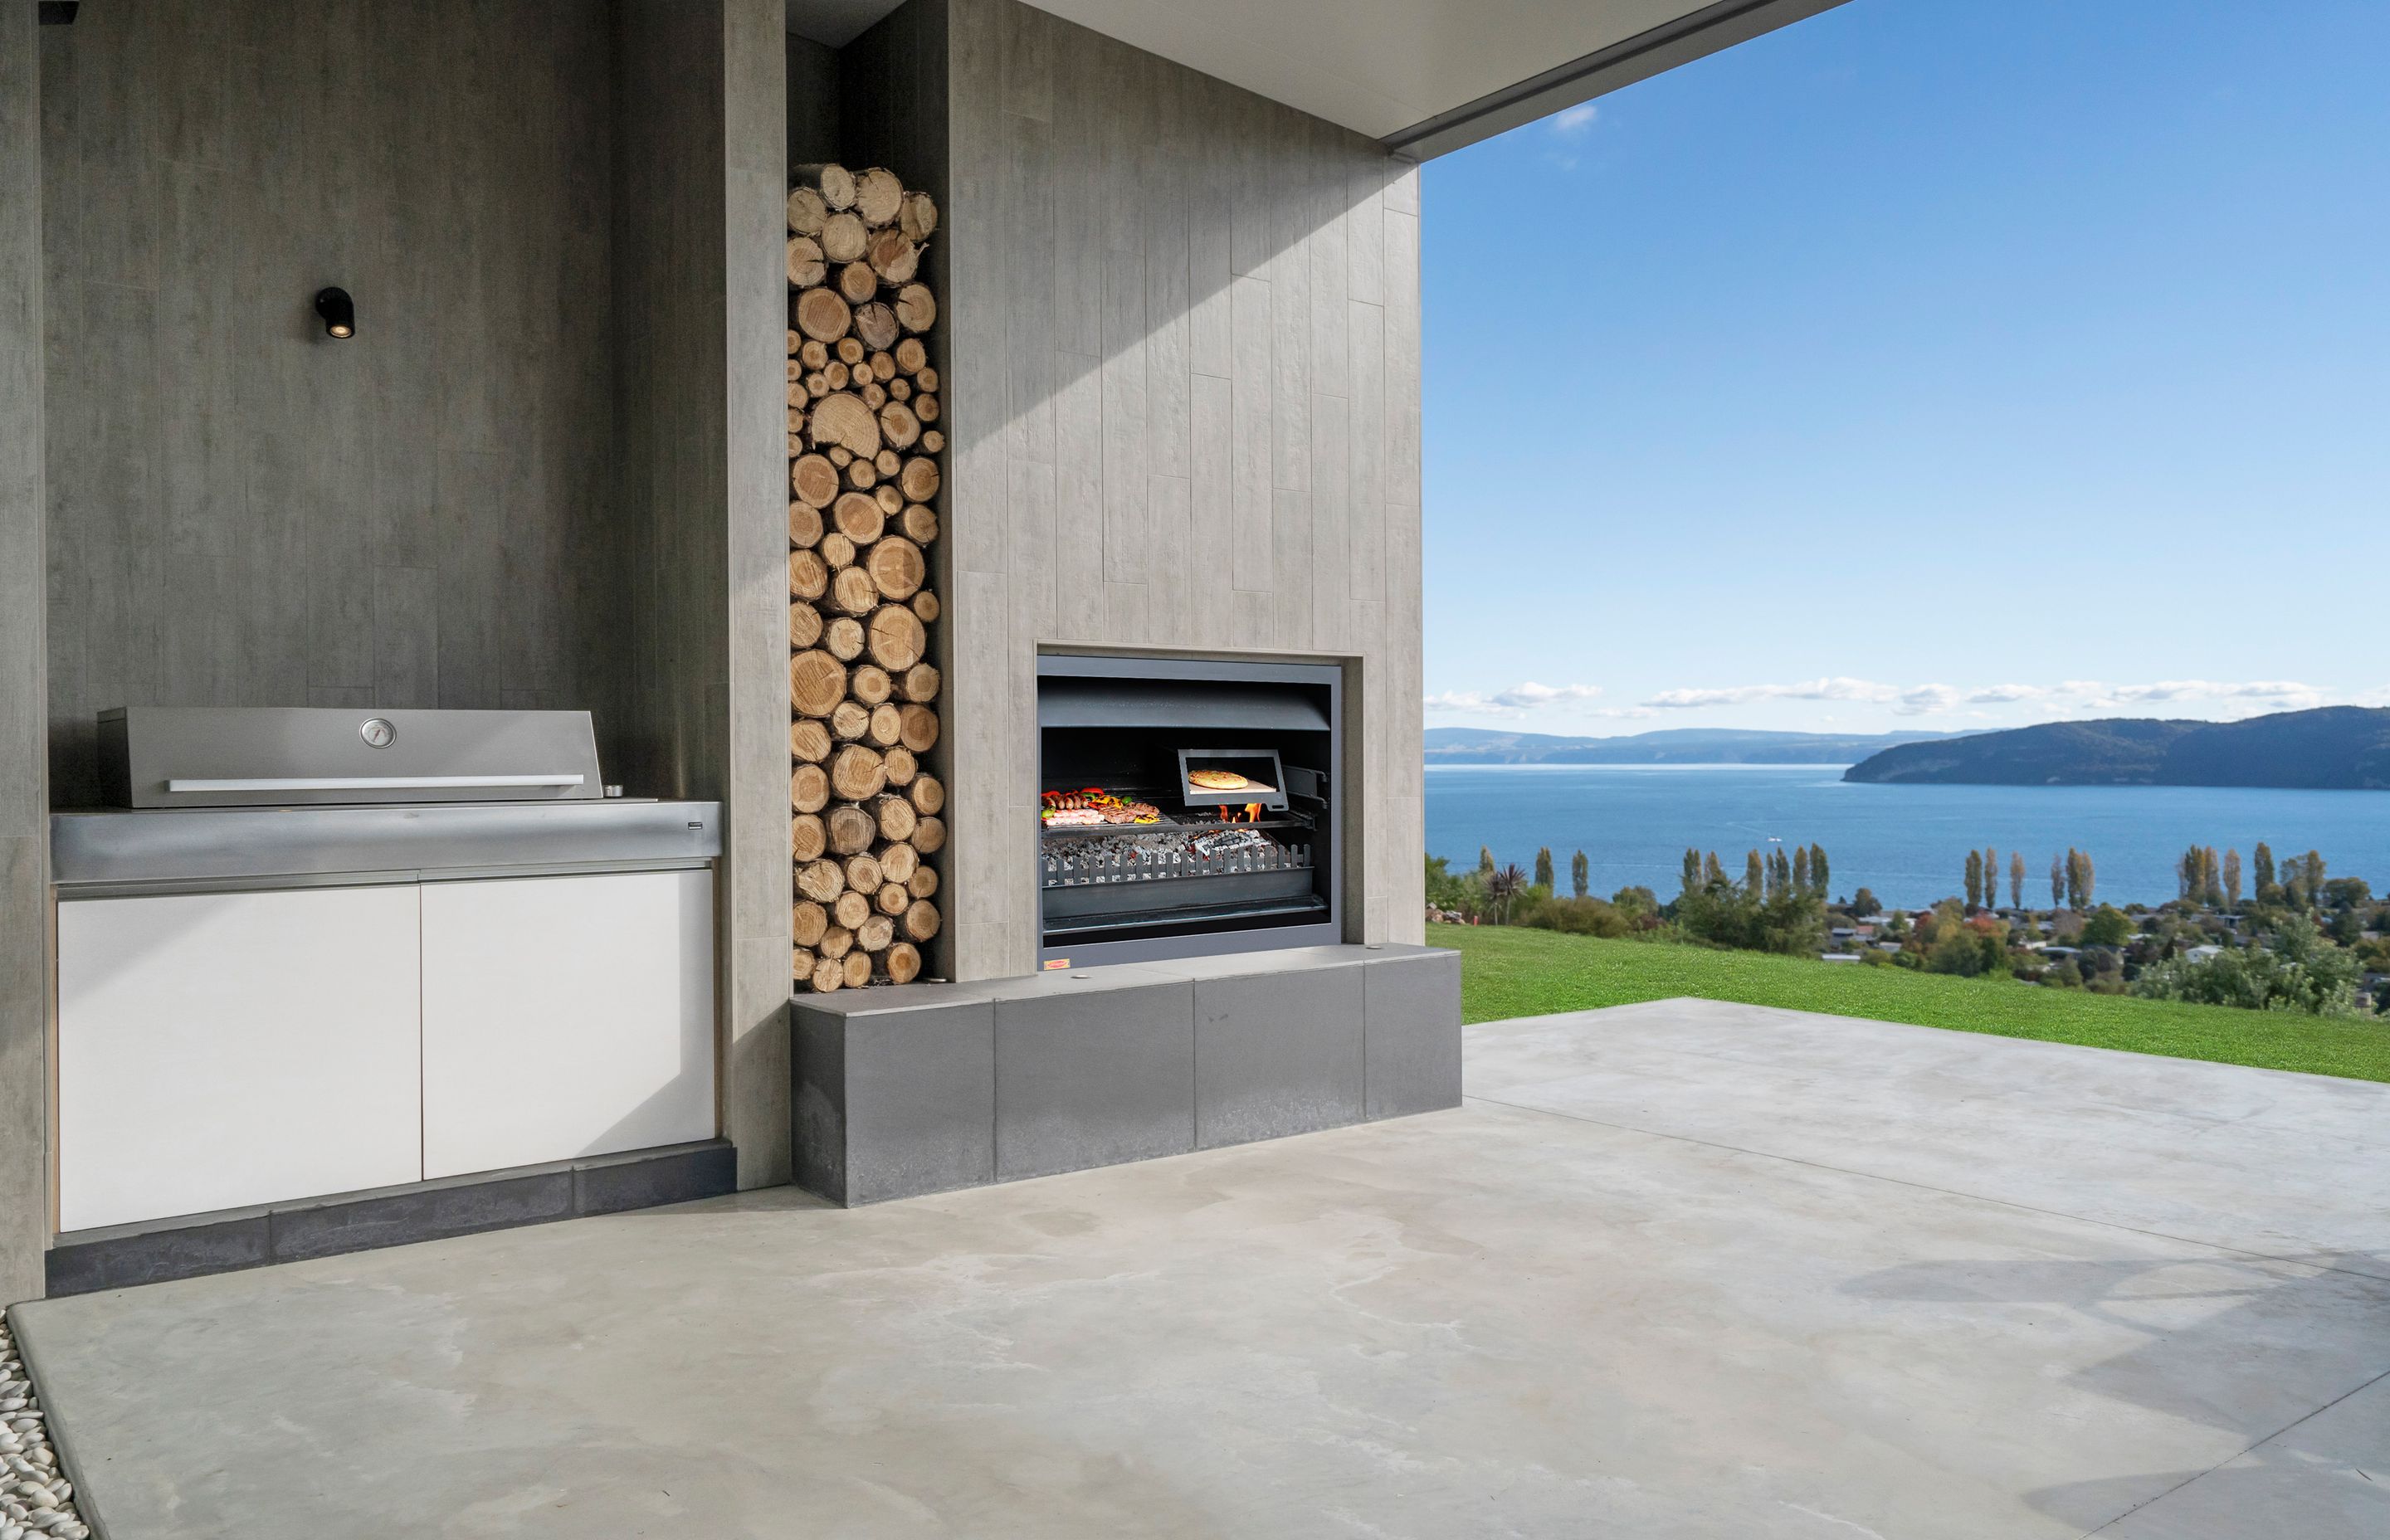 The outside kitchen, BBQ and dining area expands into lawn and overlooks Lake Taupo. Photograph: ArchiPro